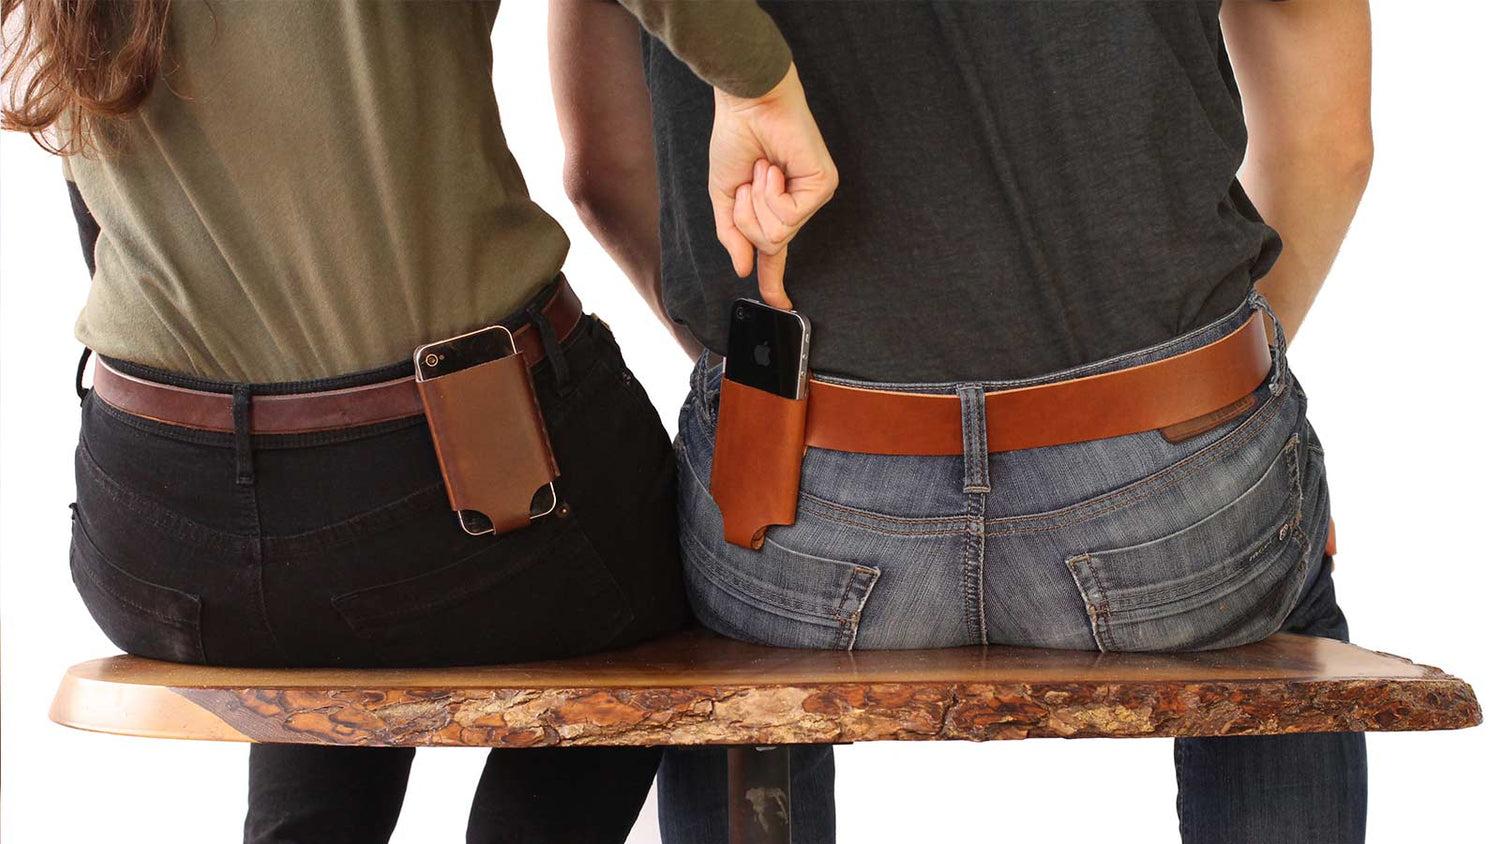 iPhone Belt Holster: How-To's - Oopsmark